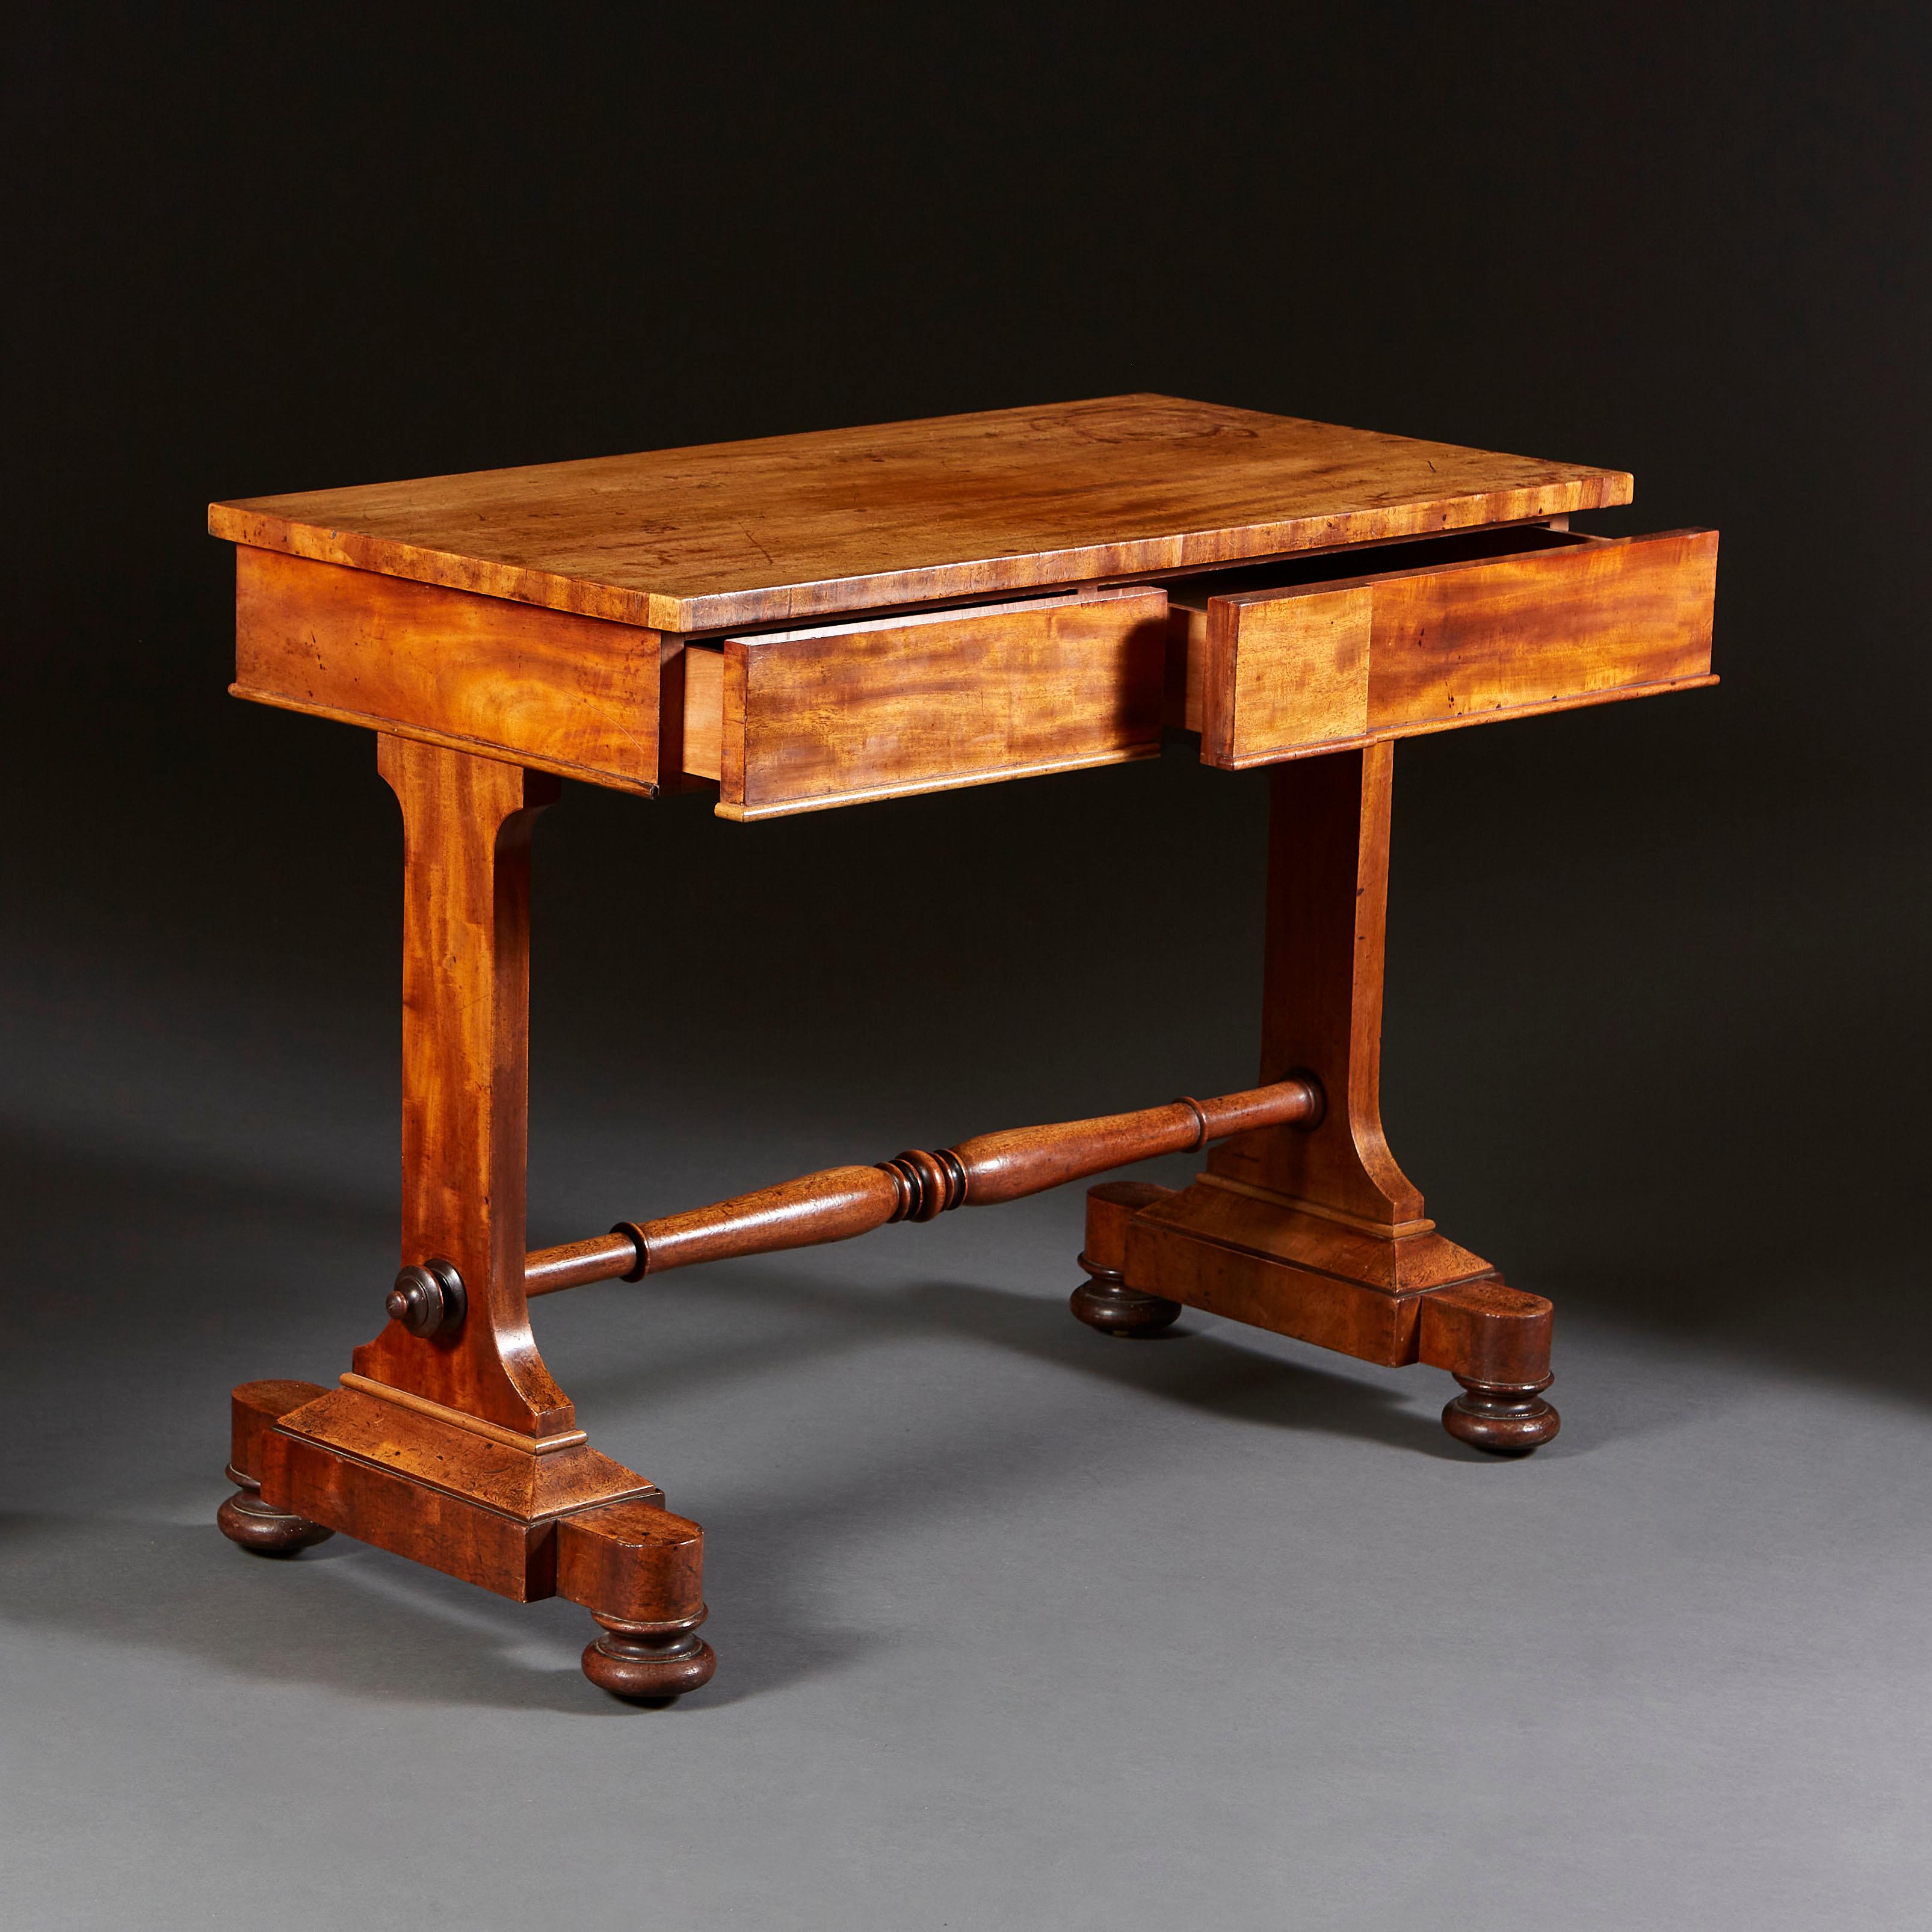 A William IV mahogany writing table, with fine patinated to the top and sides, the frieze with geometric moulding to the centre, with two drawers to the front, all supported on two uprights and turned stretcher, with bun feet.